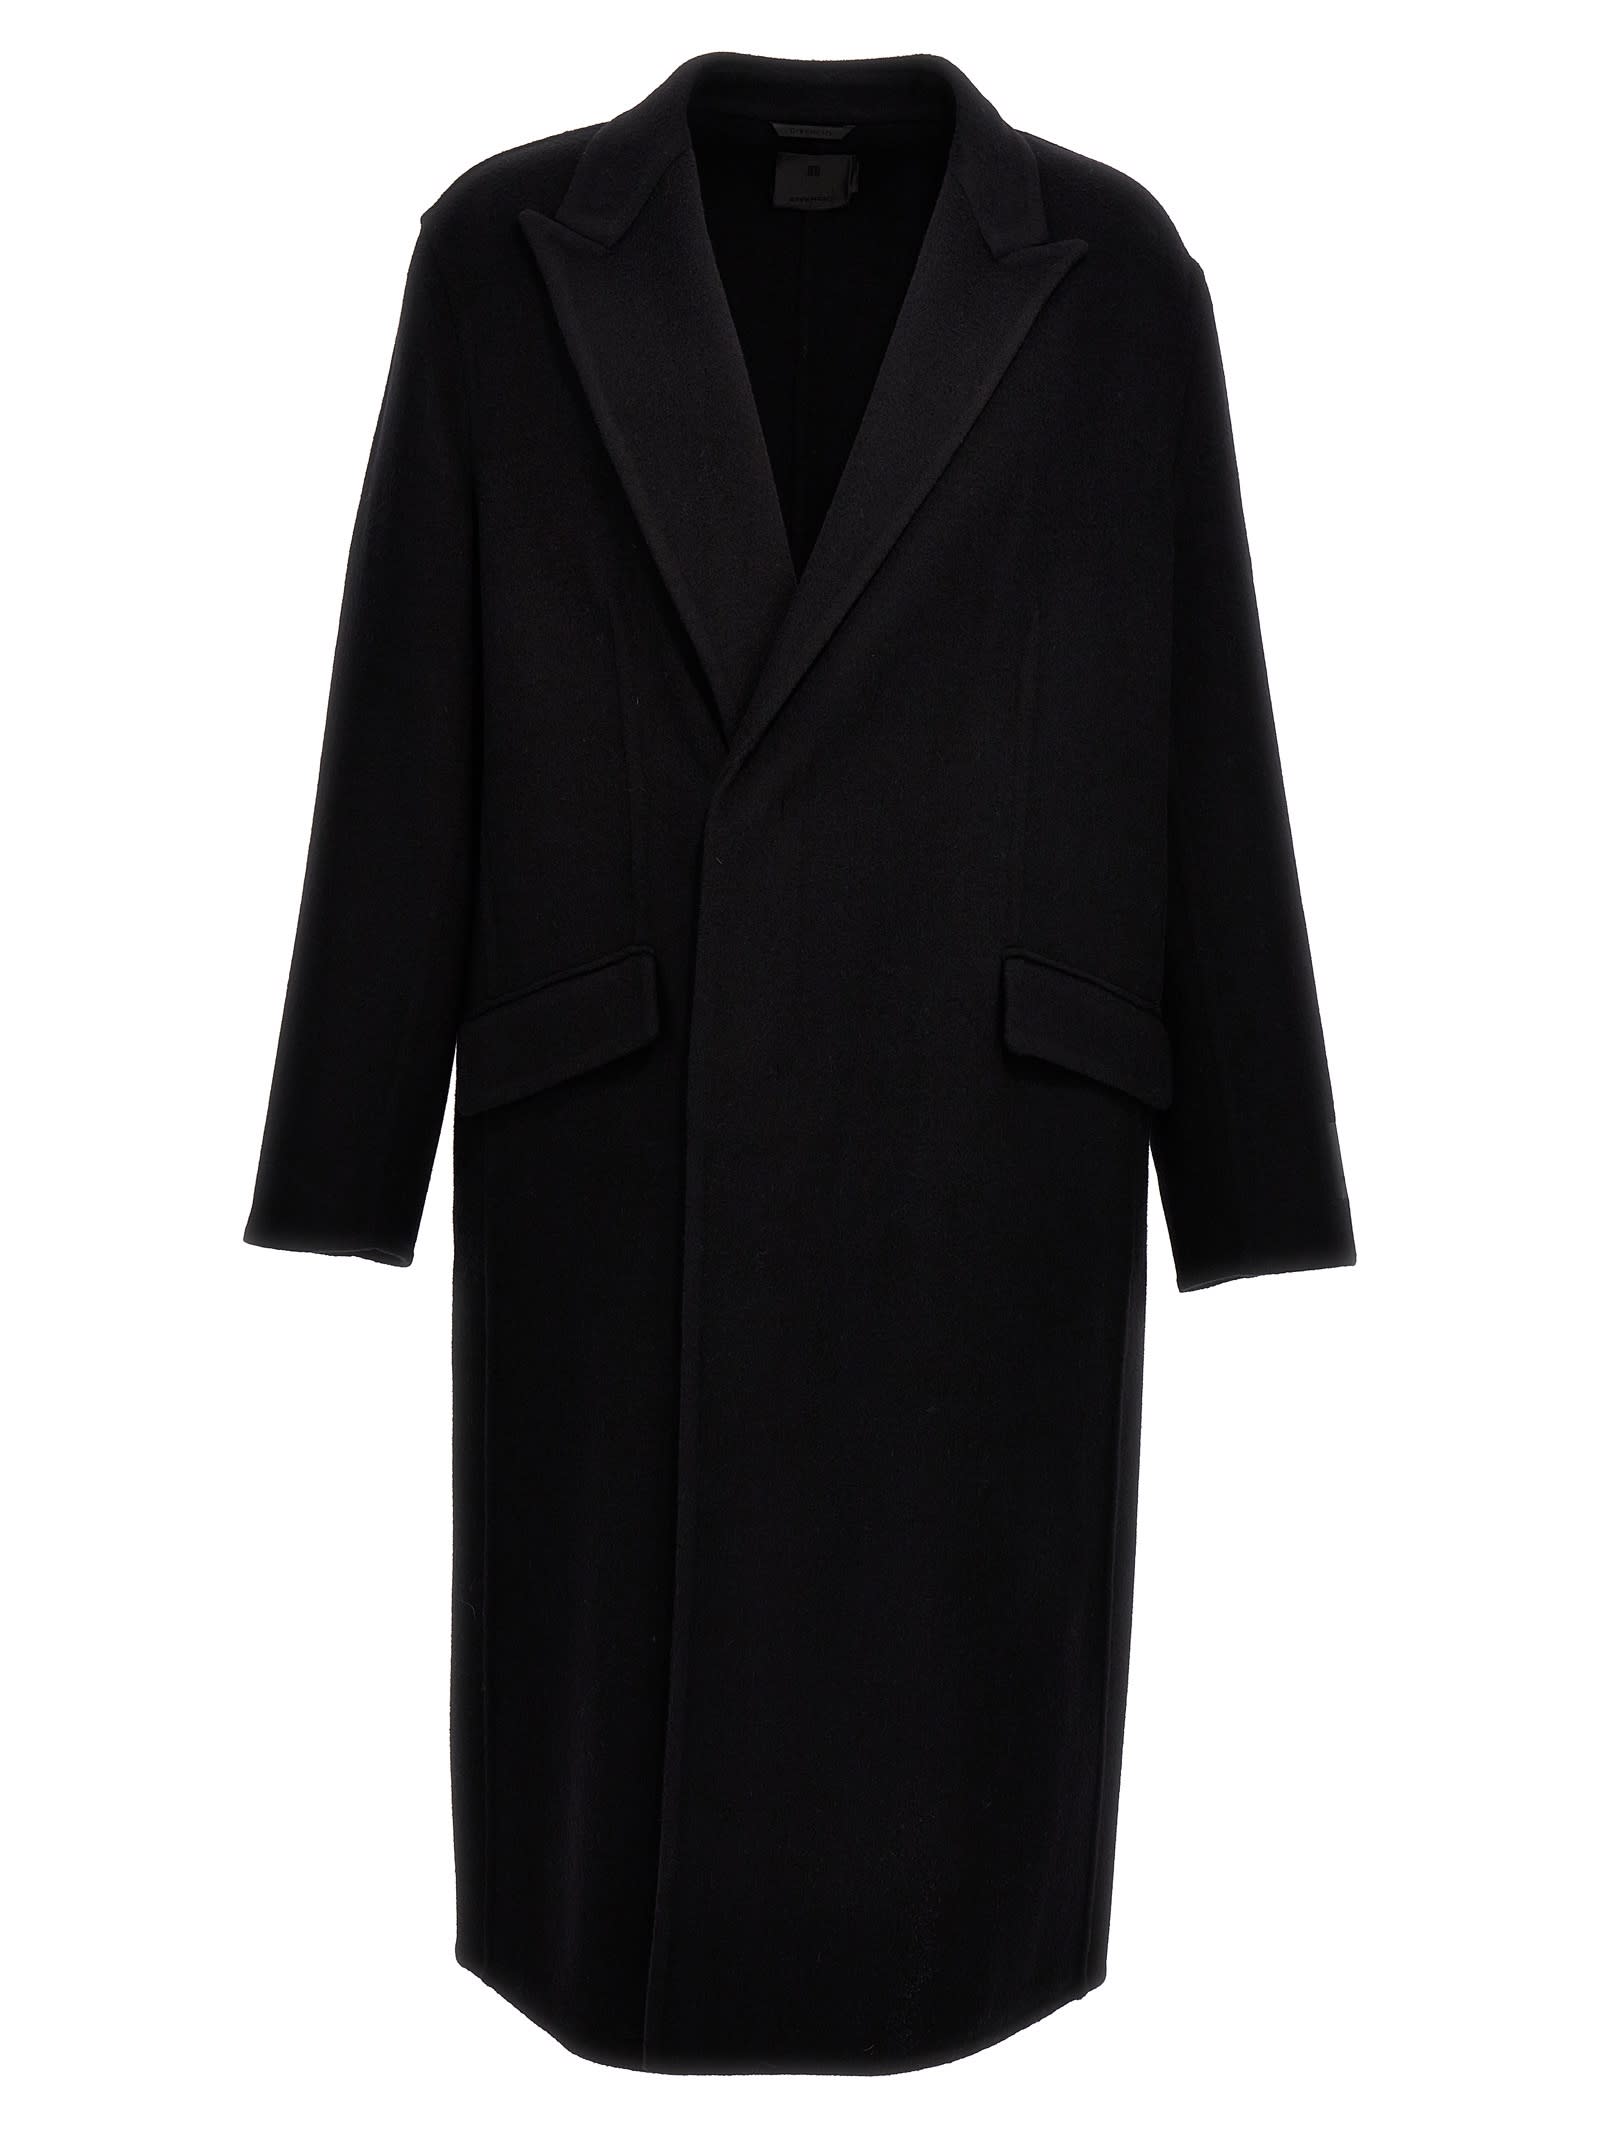 GIVENCHY COAT IN BLACK WOOL